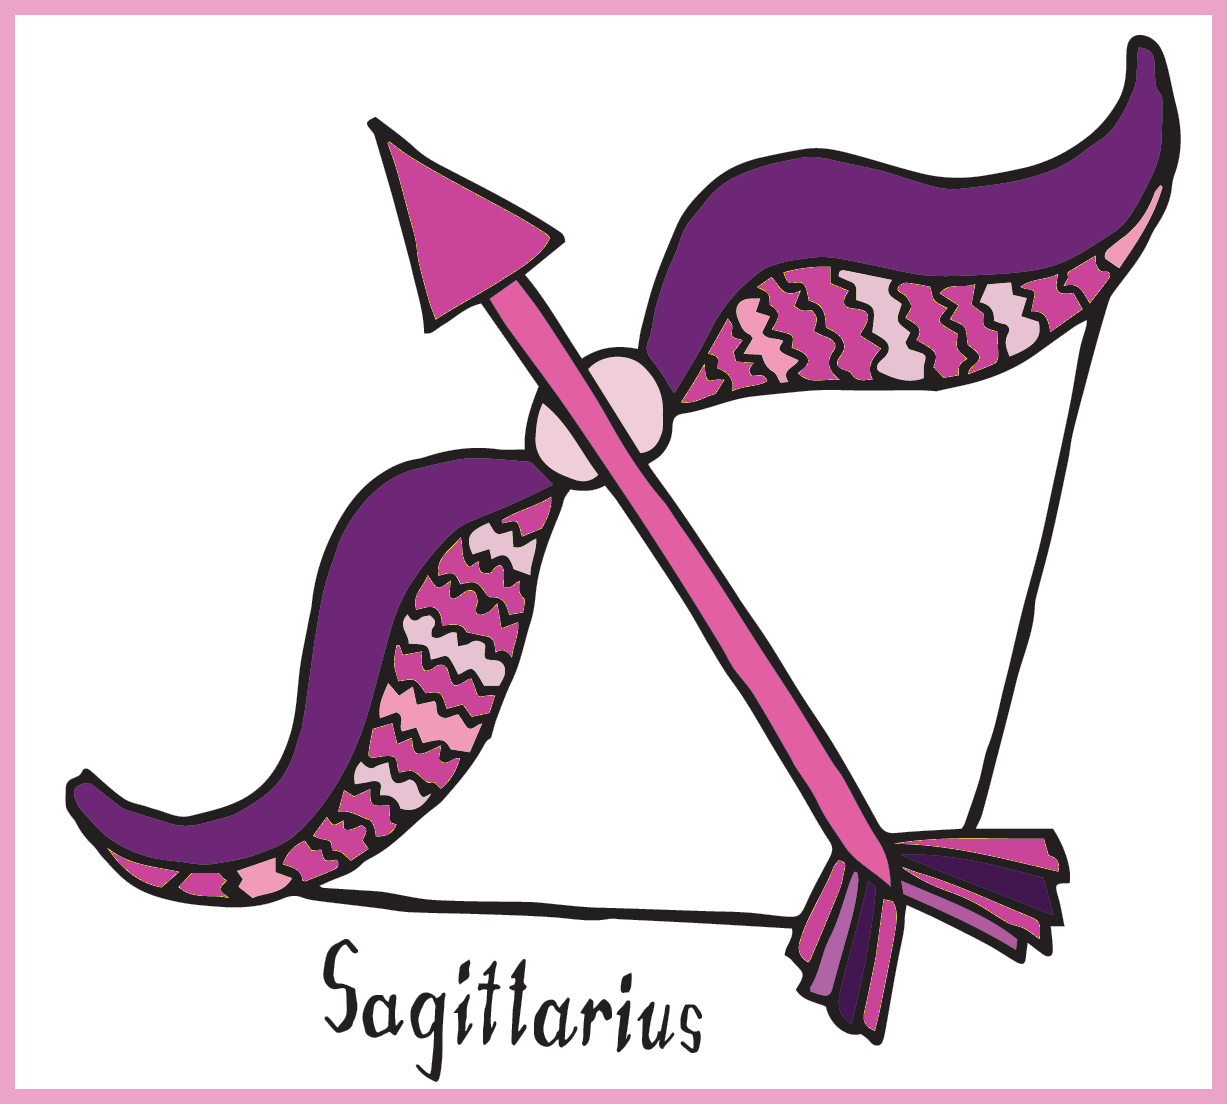 A bow and arrow in various shades of pink and purple